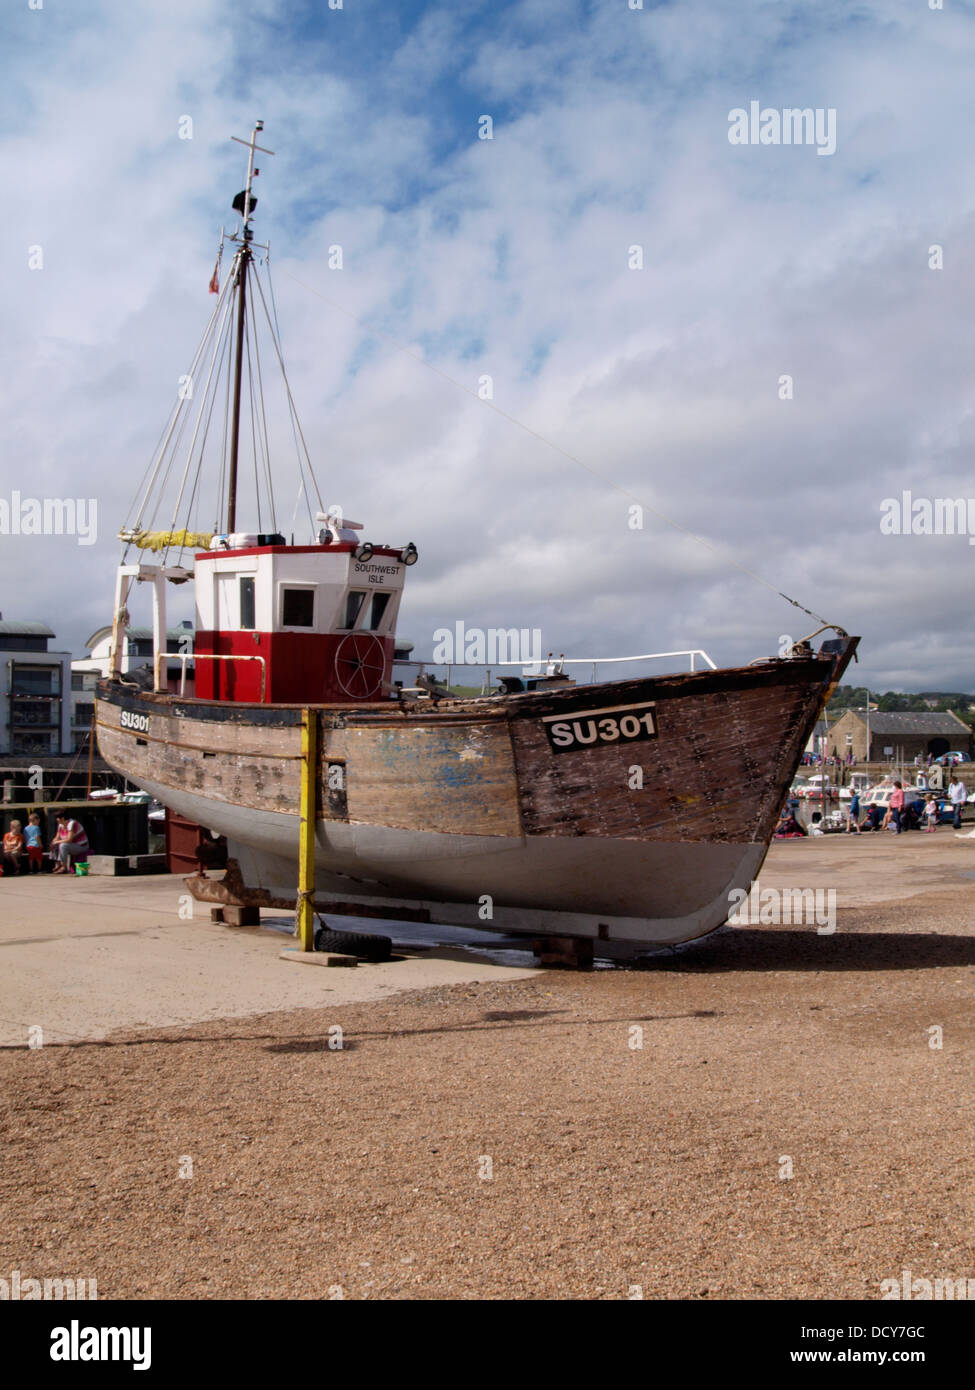 Small commercial fishing boat on the quay, West Bay, formerly known as Bridport Harbour, Dorset, UK 2013 Stock Photo